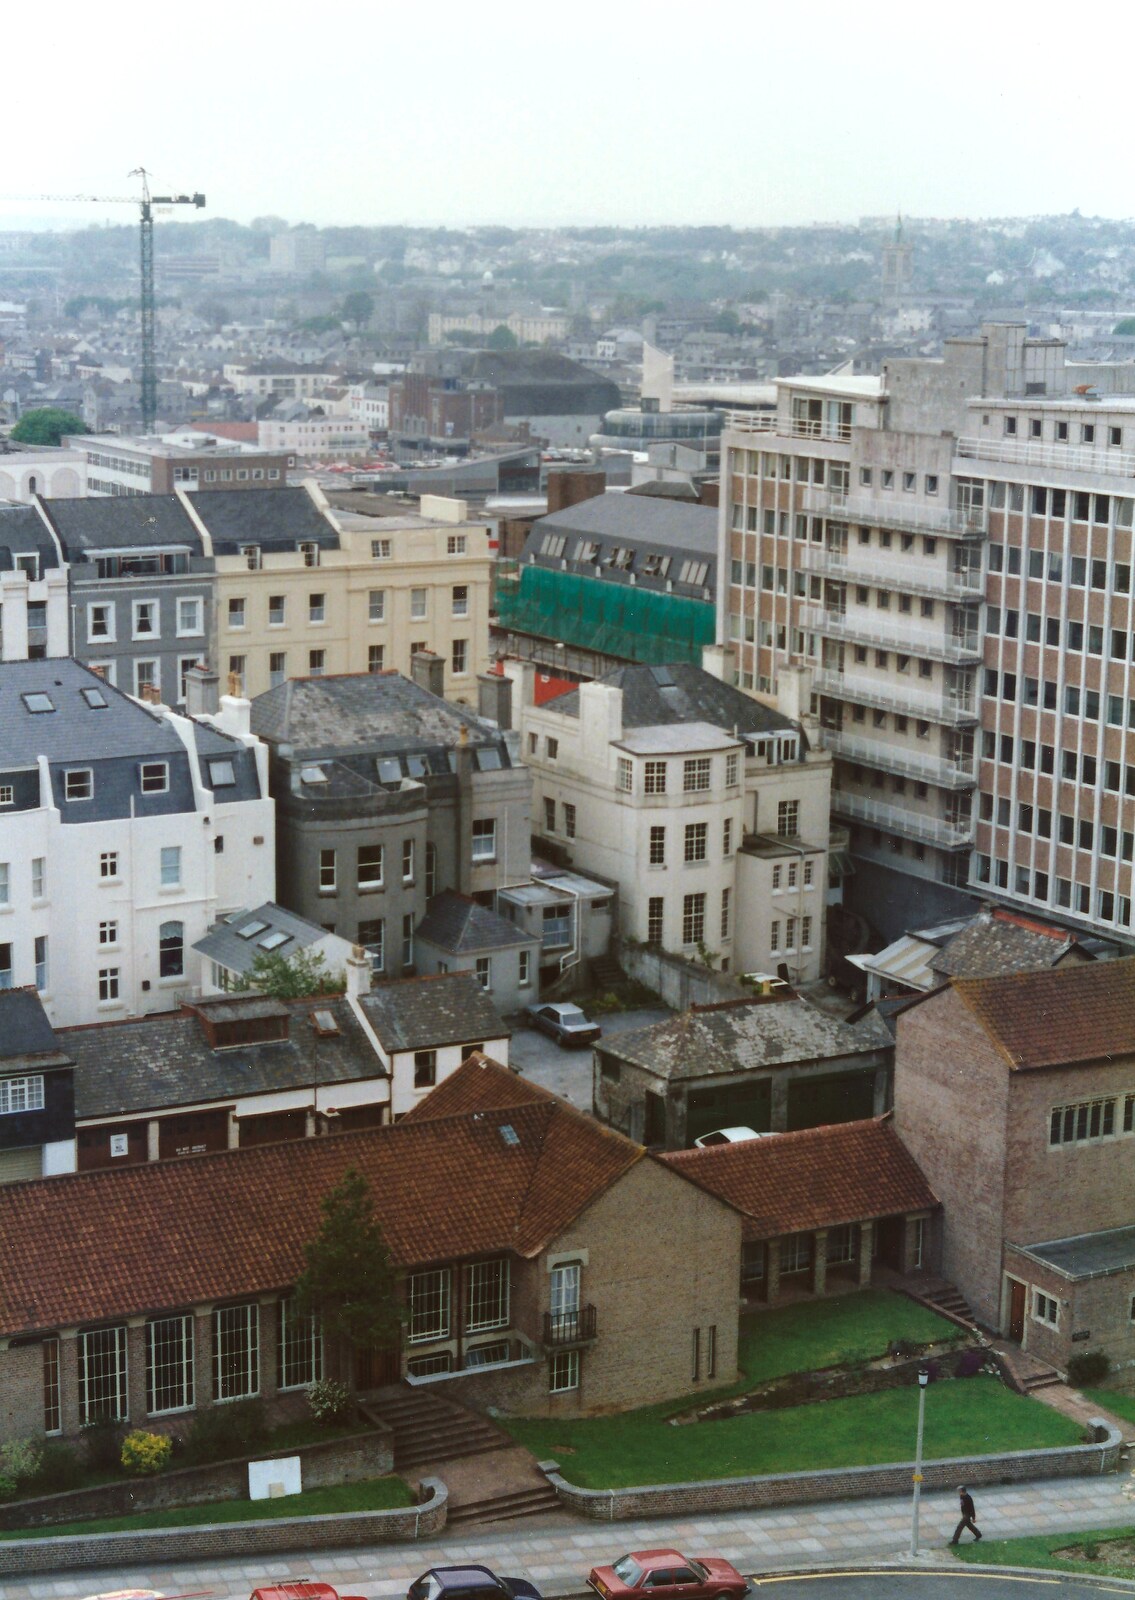 An engineering outpost on Buckwell Street from Aerial Scenes of Plymouth, Devon - 28th June 1987